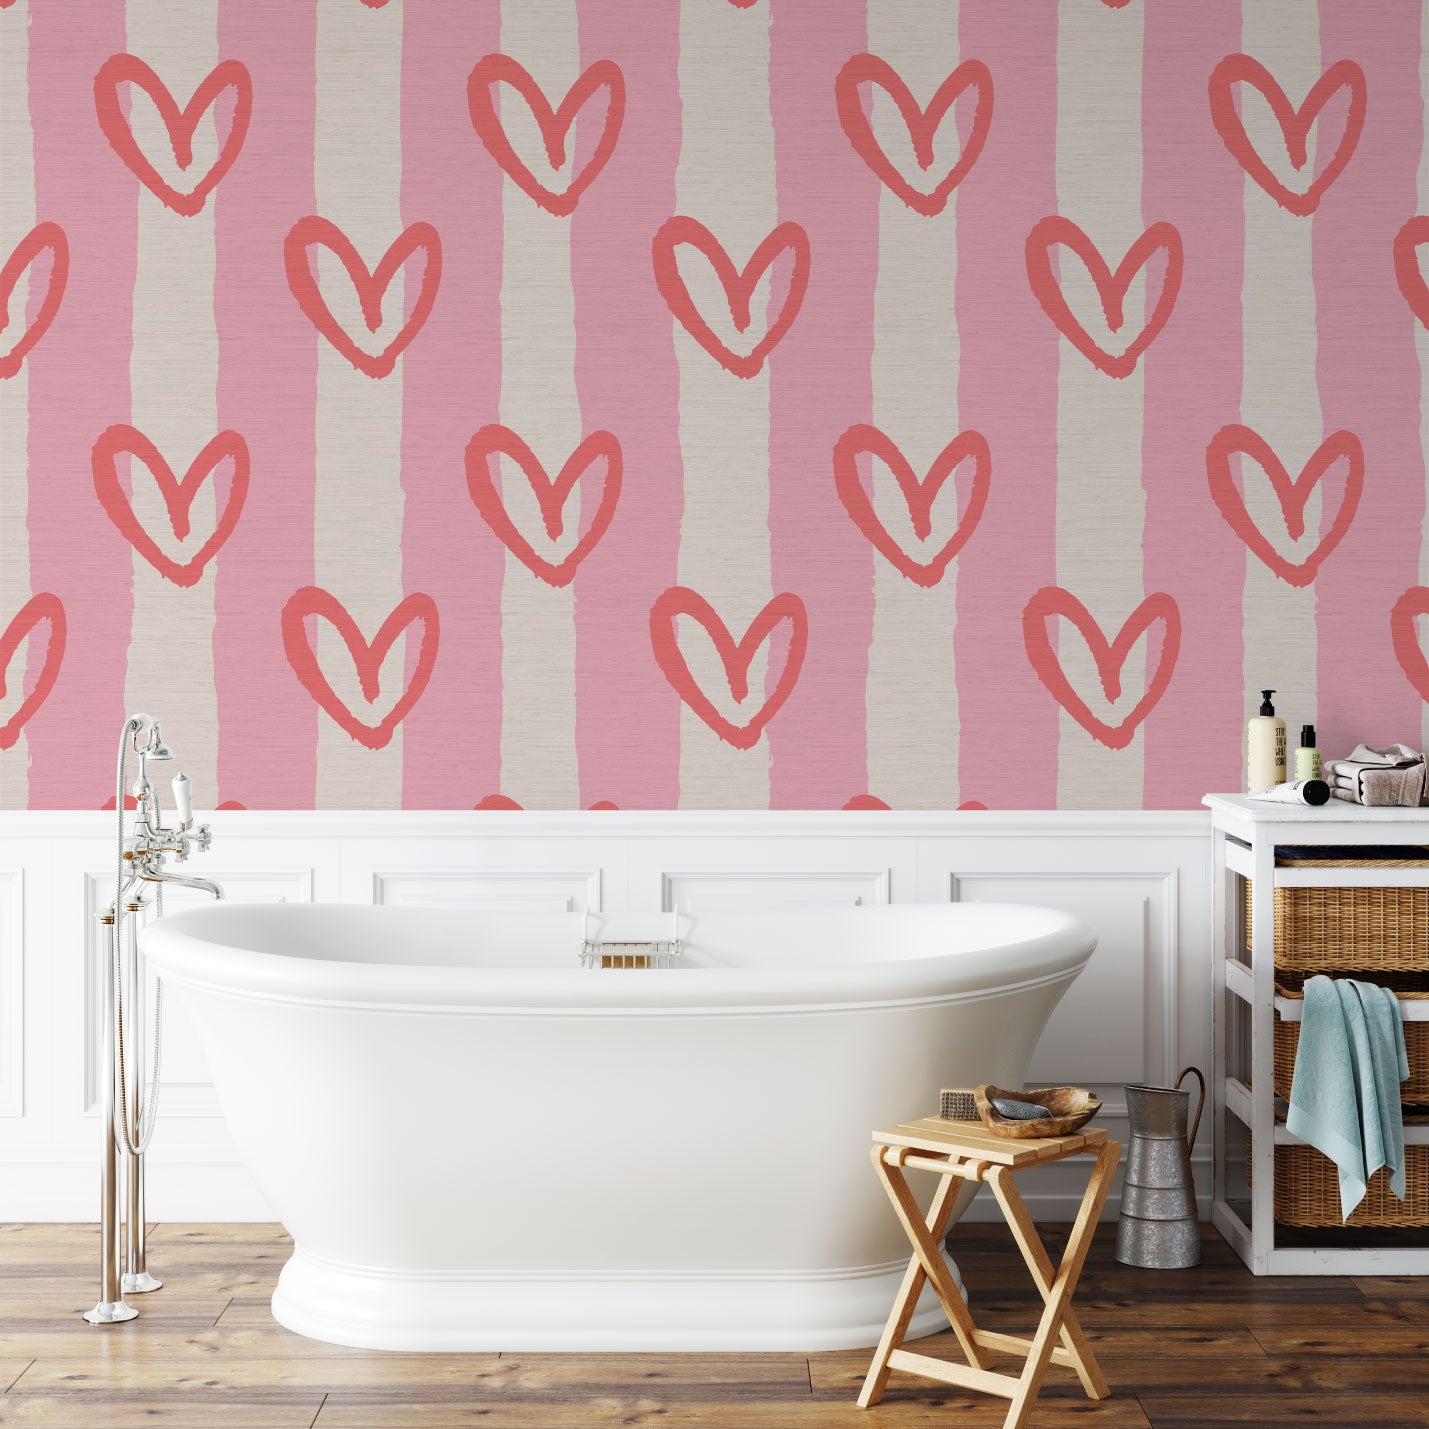 hearts vertical wide stripes house of shan collaboration kids playroom nursery Grasscloth wallpaper Natural Textured Eco-Friendly Non-toxic High-quality  Sustainable Interior Design Bold Custom Tailor-made Retro chic Bold fun pink red white bathroom nursery girl bedroom